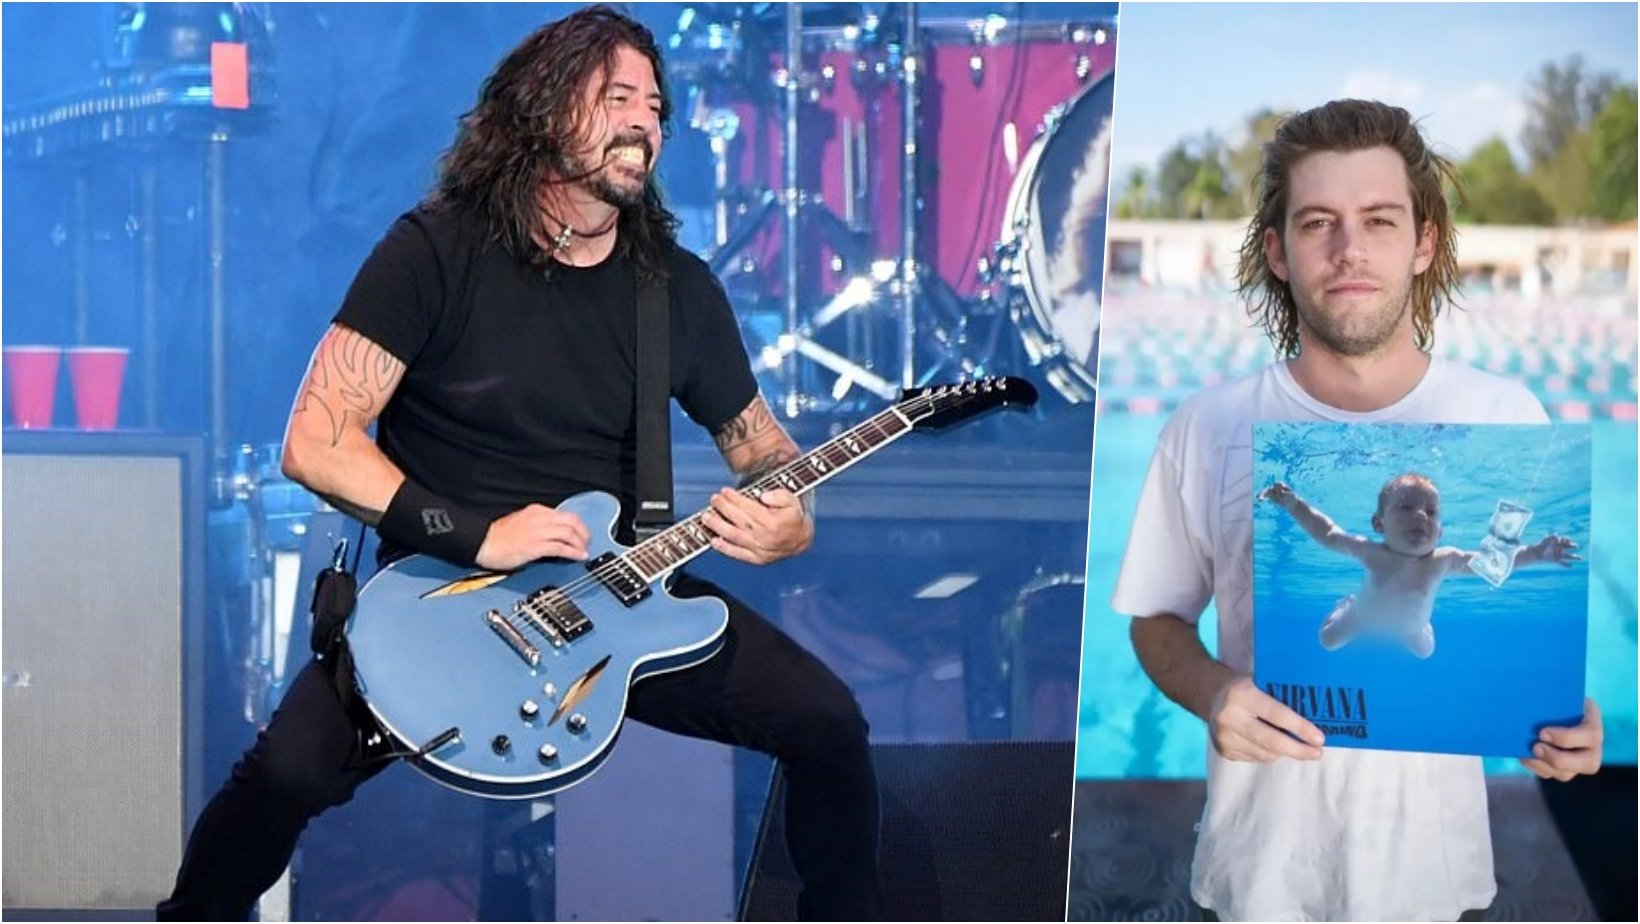 6 facebook cover 7.jpg?resize=1200,630 - David Grohl Reacts On Lawsuit Against Nirvana’s “Nevermind” Album Cover